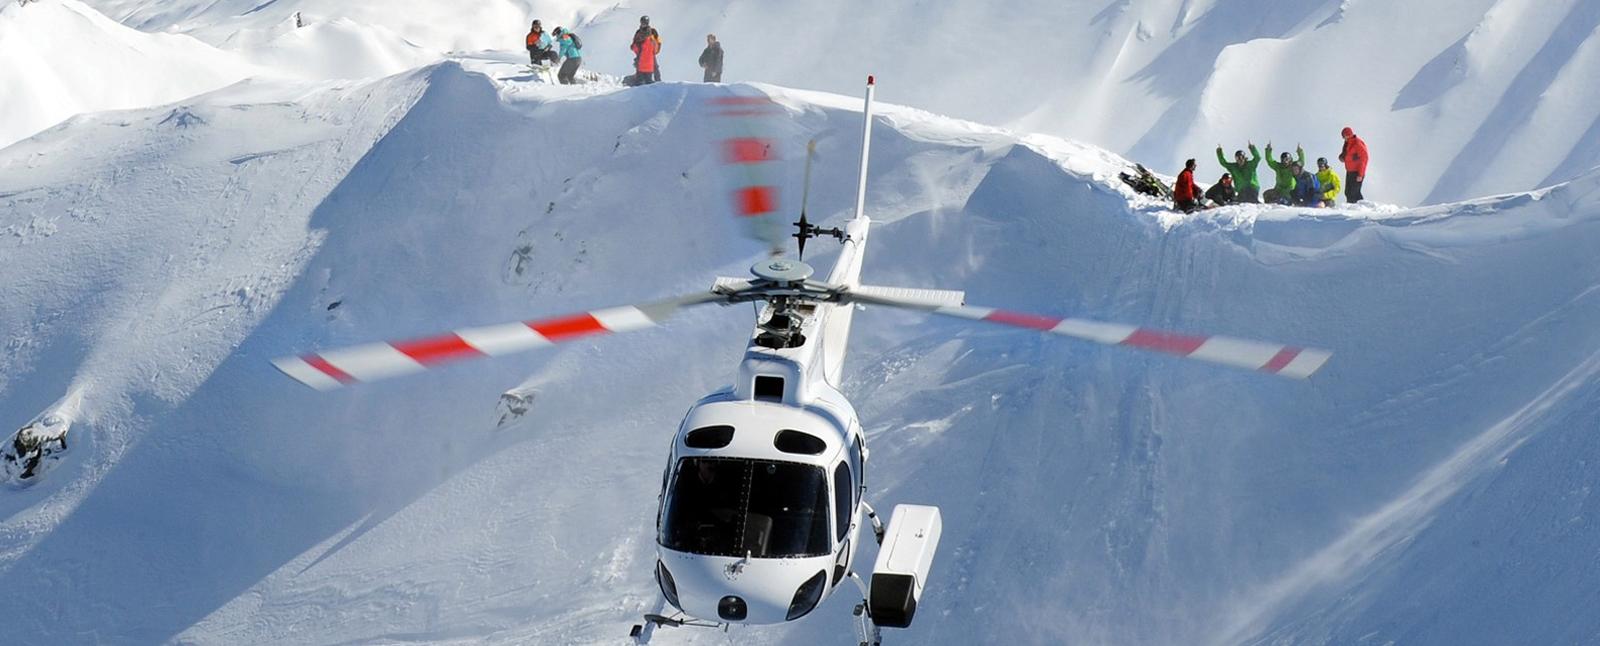 Group of you skiers being dropped off by a helicopter in the Methvan mountains.